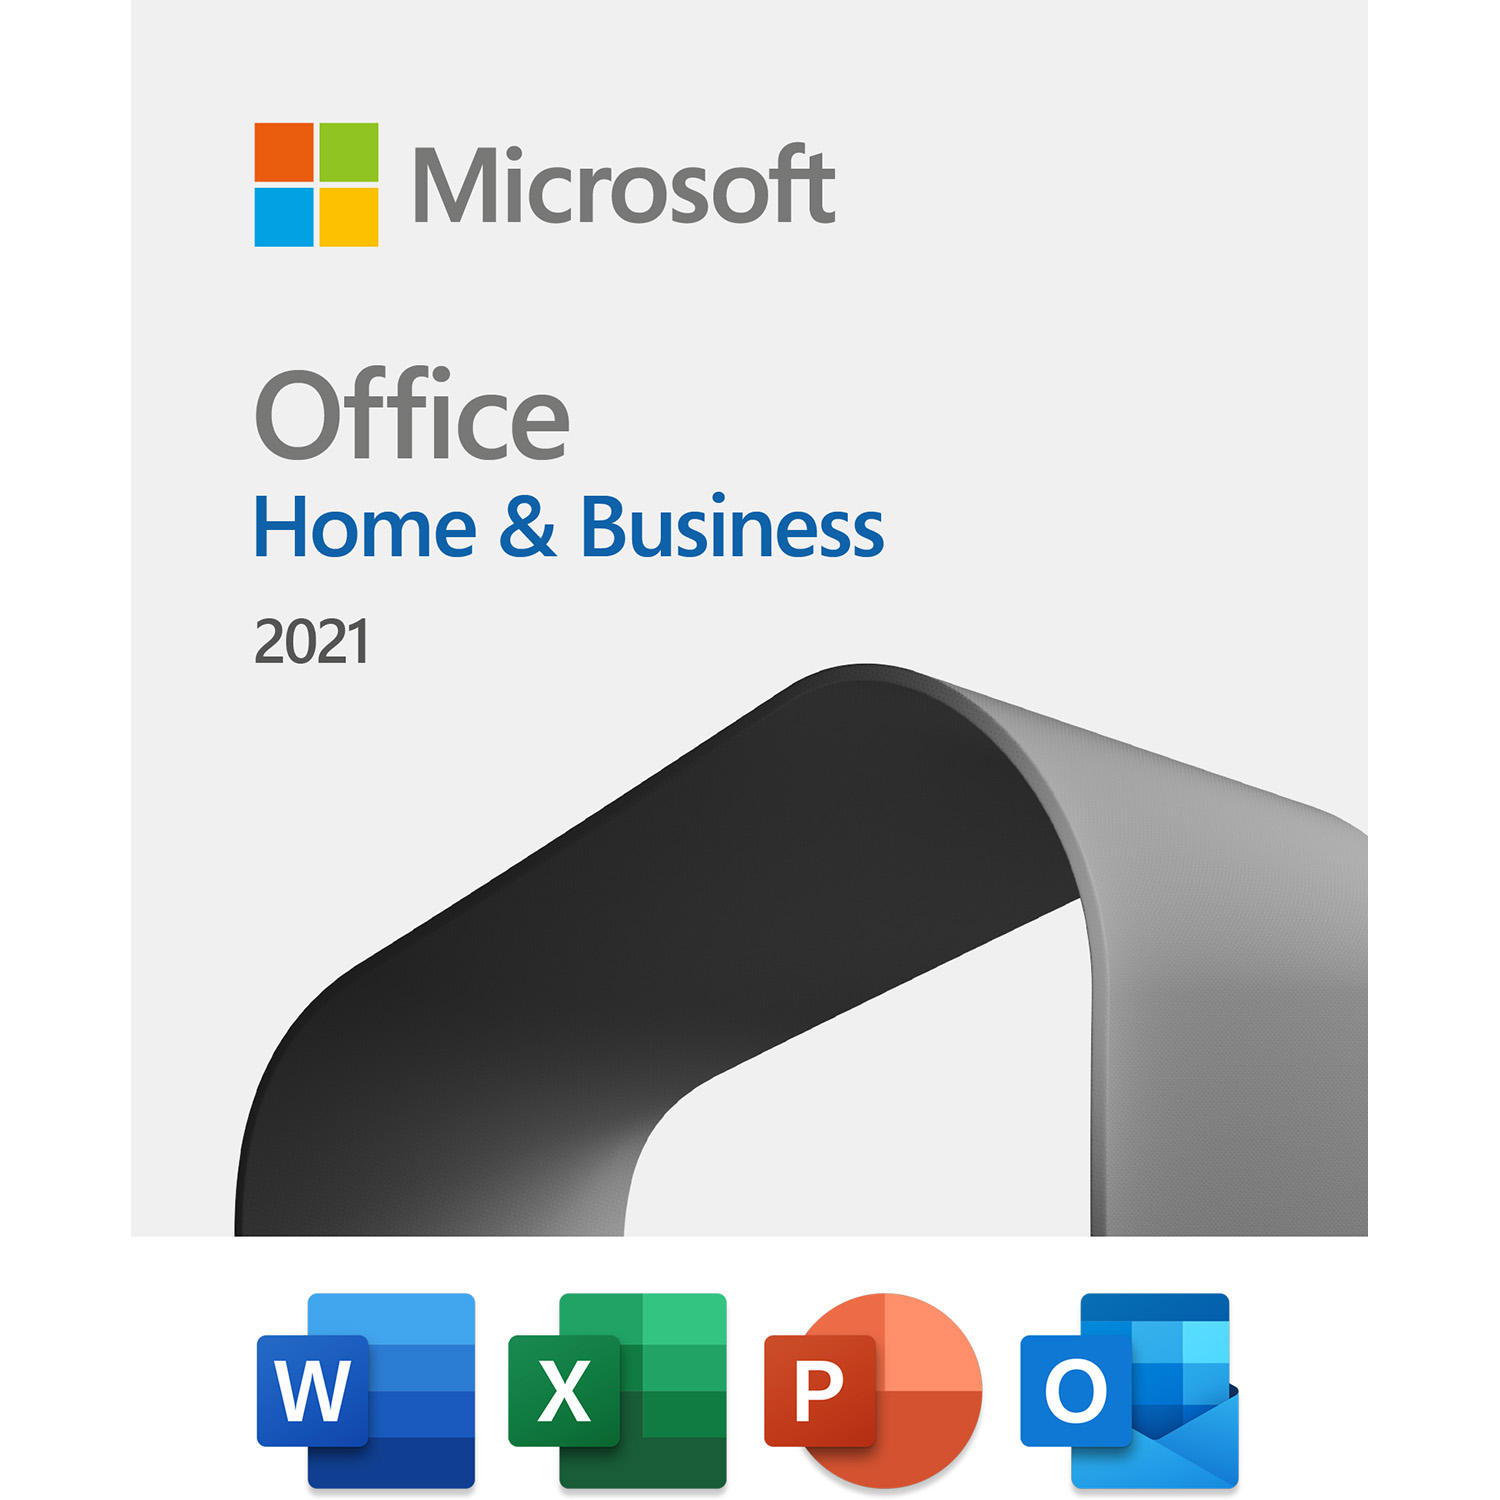 Microsoft Office Home & Business 2021 One-time purchase for 1 PC or Mac Download